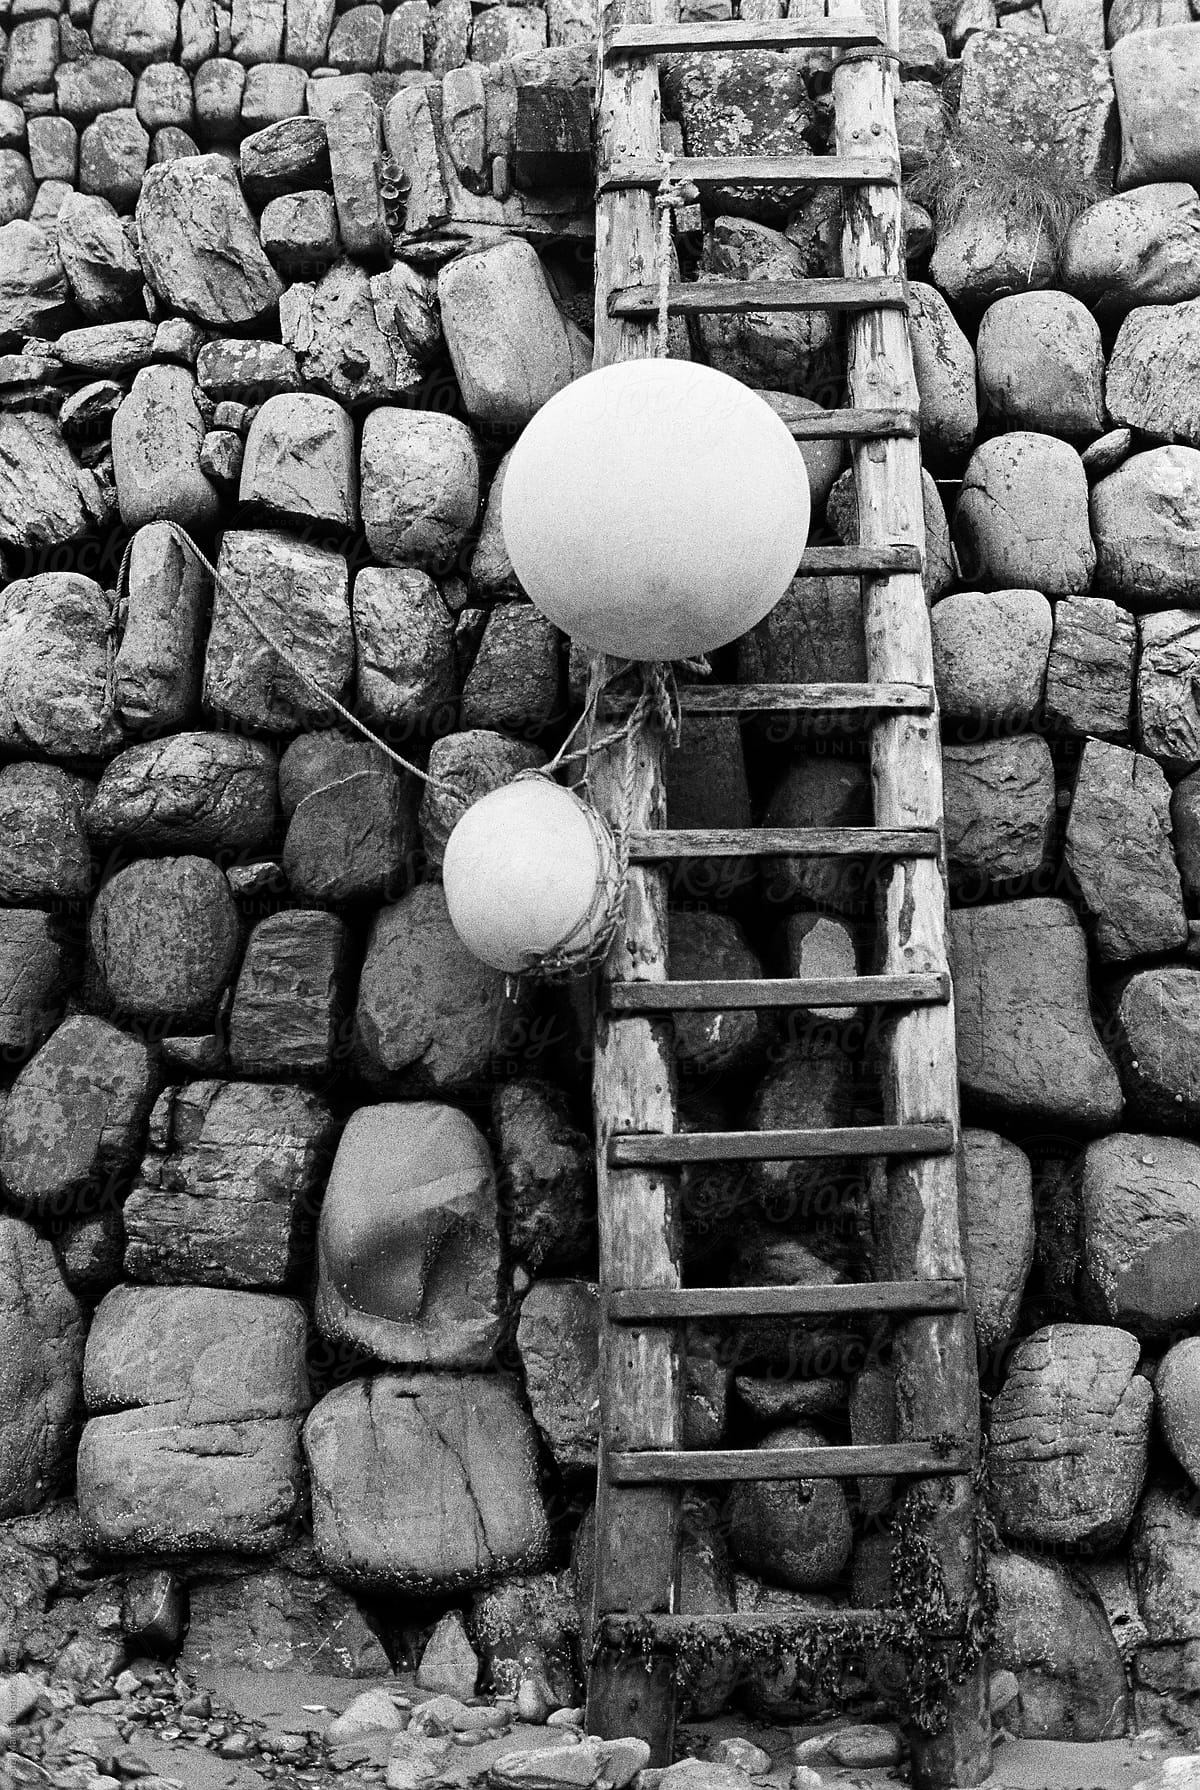 Ladder and buoys on a seawall